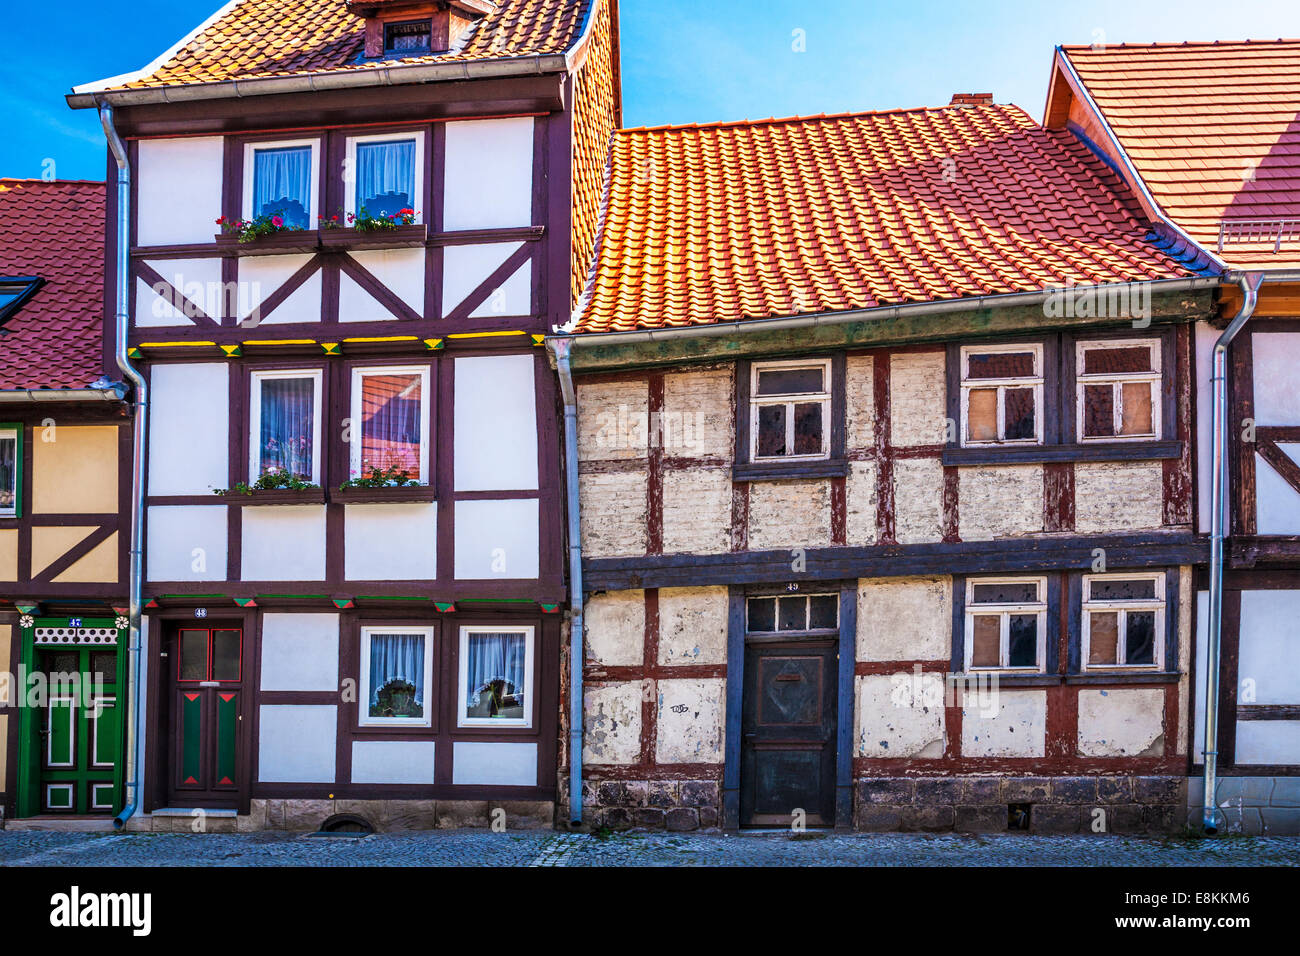 Crooked half-timbered medieval house in the UNESCO World Heritage town of Quedlinburg, Germany. Stock Photo